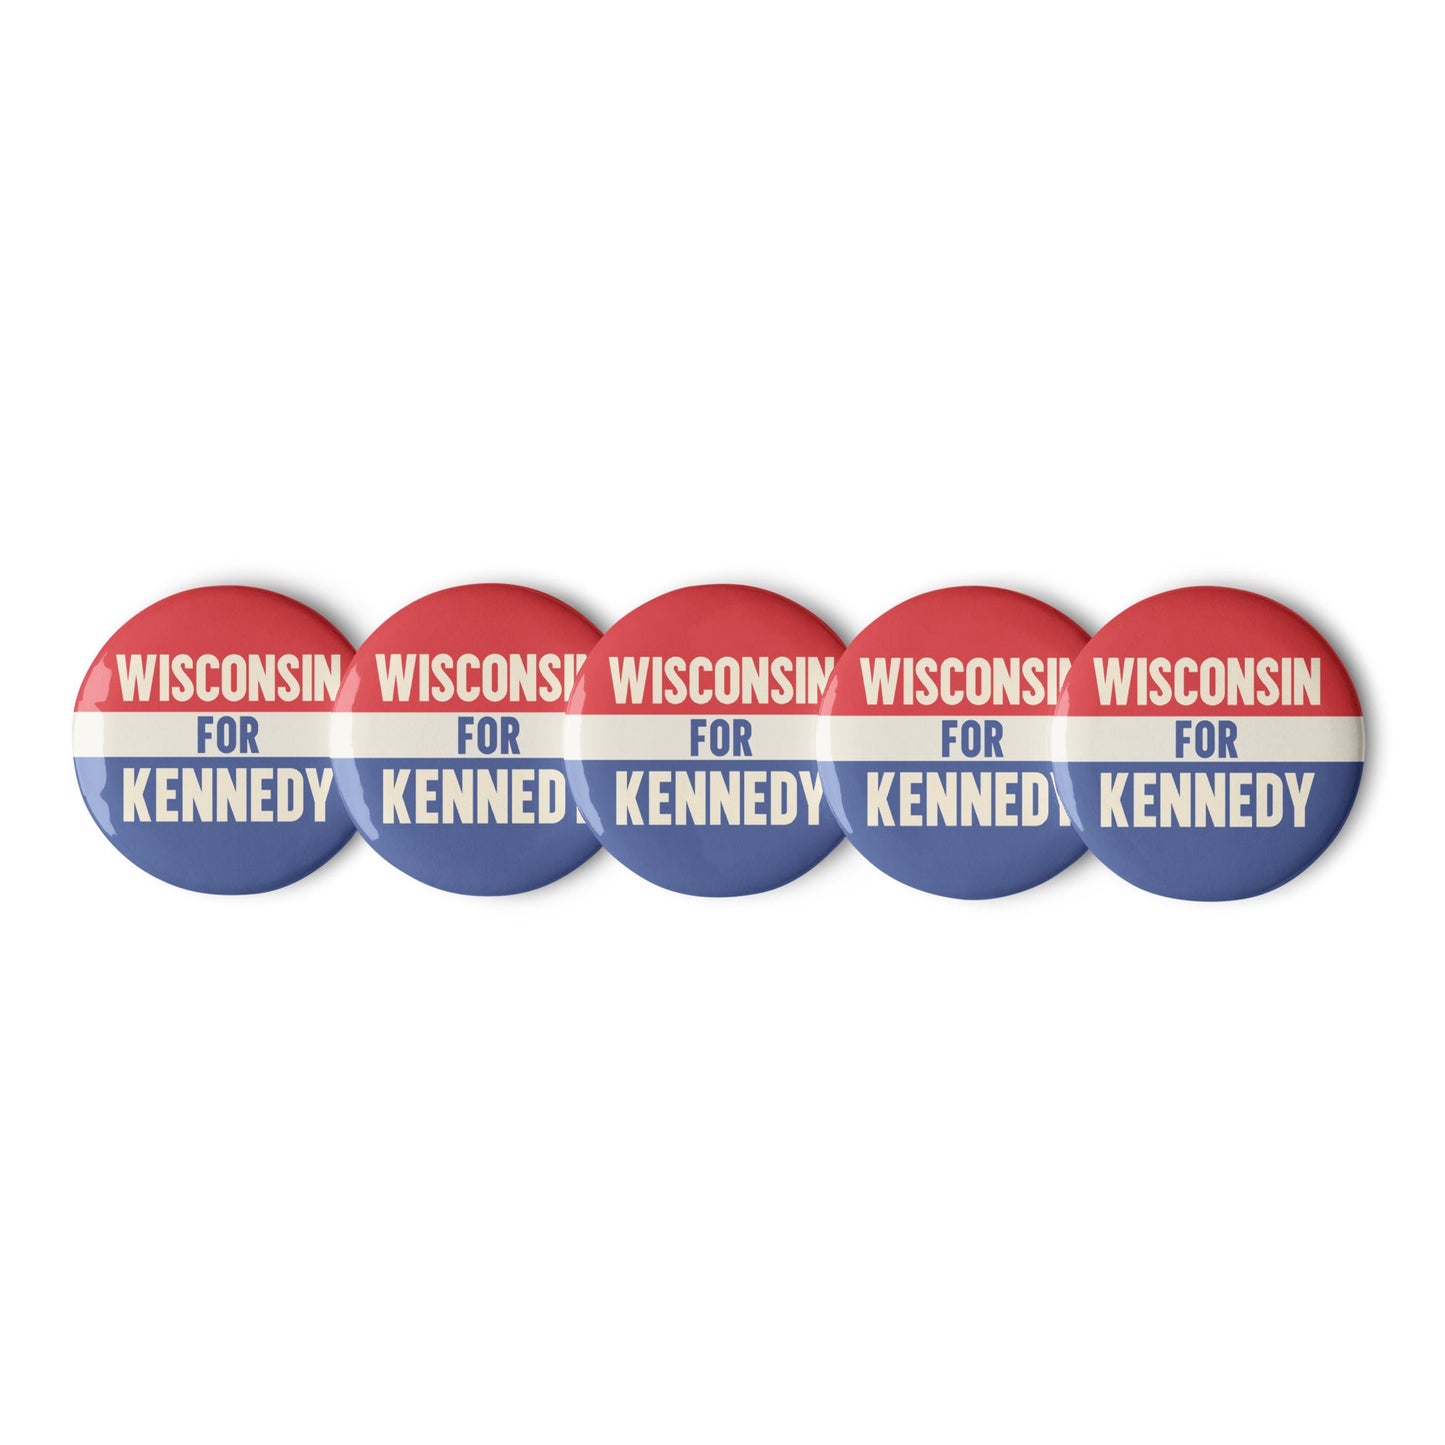 Wisconsin for Kennedy (5 Buttons) - TEAM KENNEDY. All rights reserved